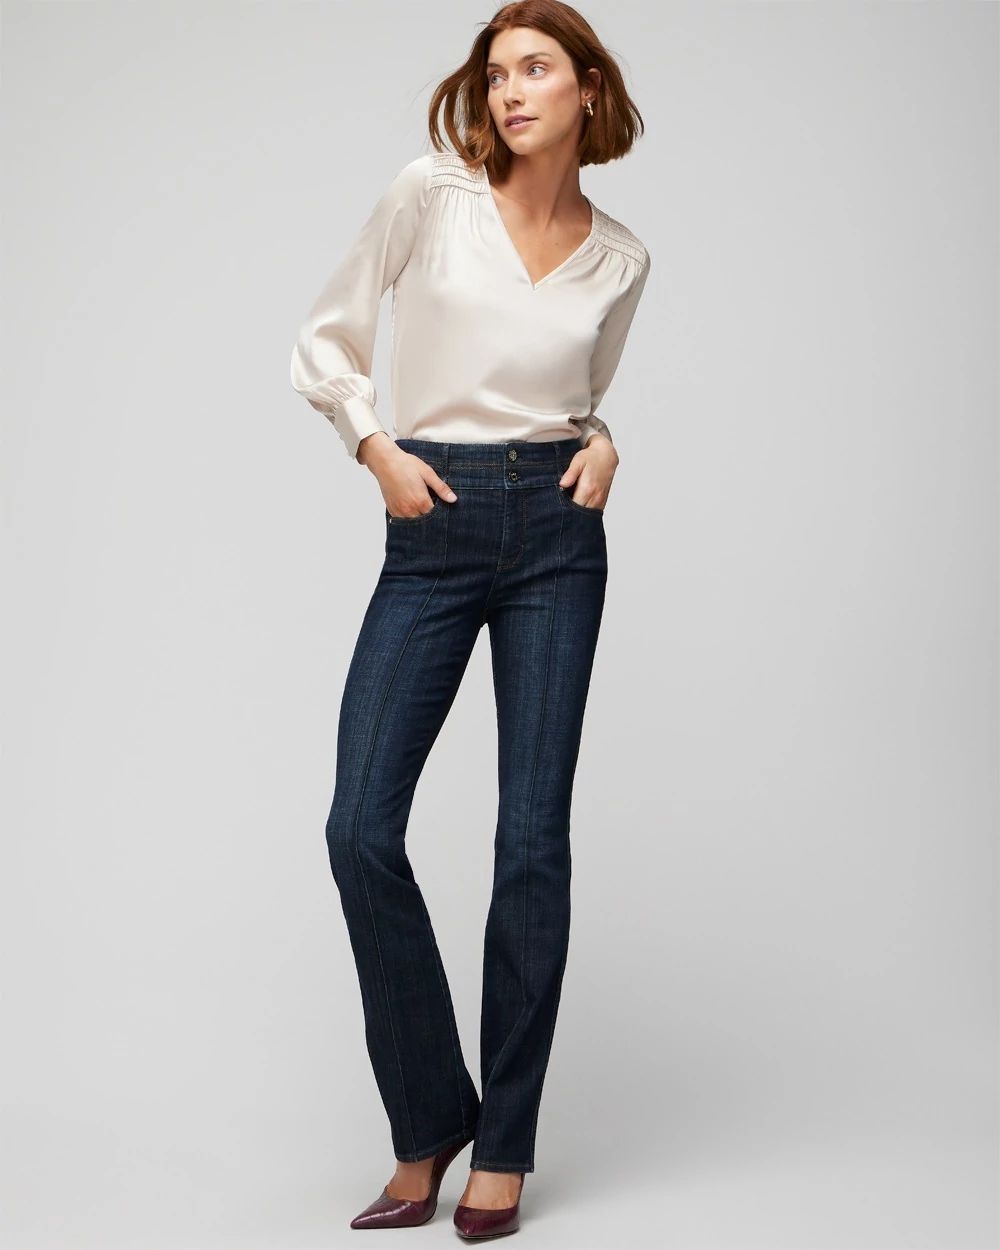 Petite Extra High Rise Everyday Soft Pintuck Skinny Flare